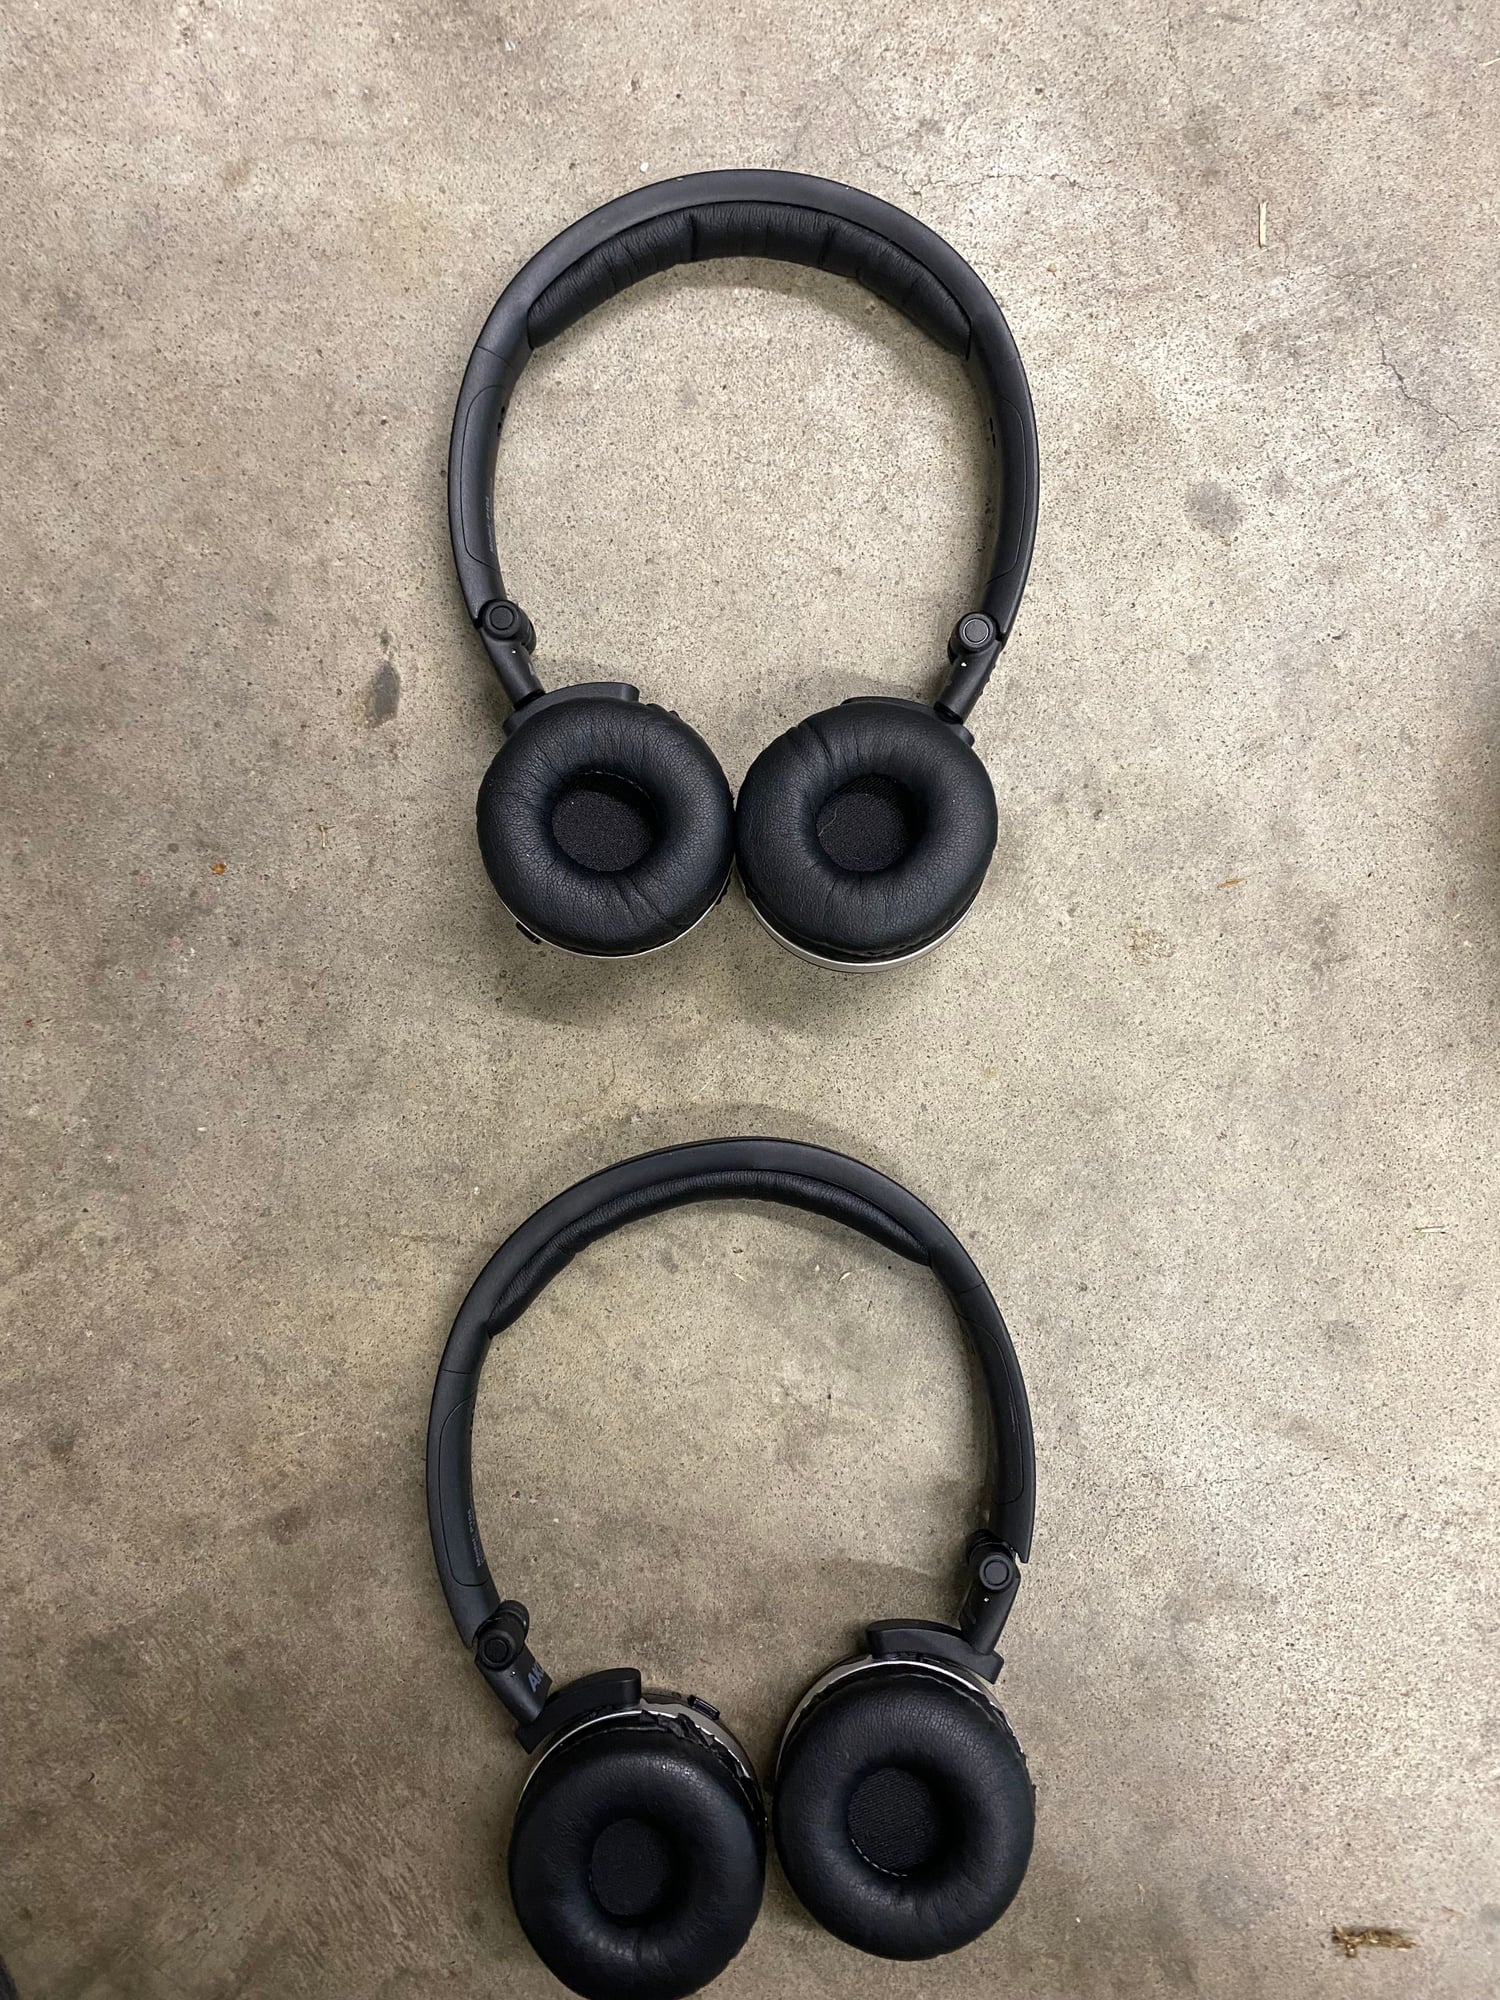 Audio Video/Electronics - Pair of MB BT Headphones - Used - All Years Mercedes-Benz All Models - Lake Wylie, SC 29710, United States